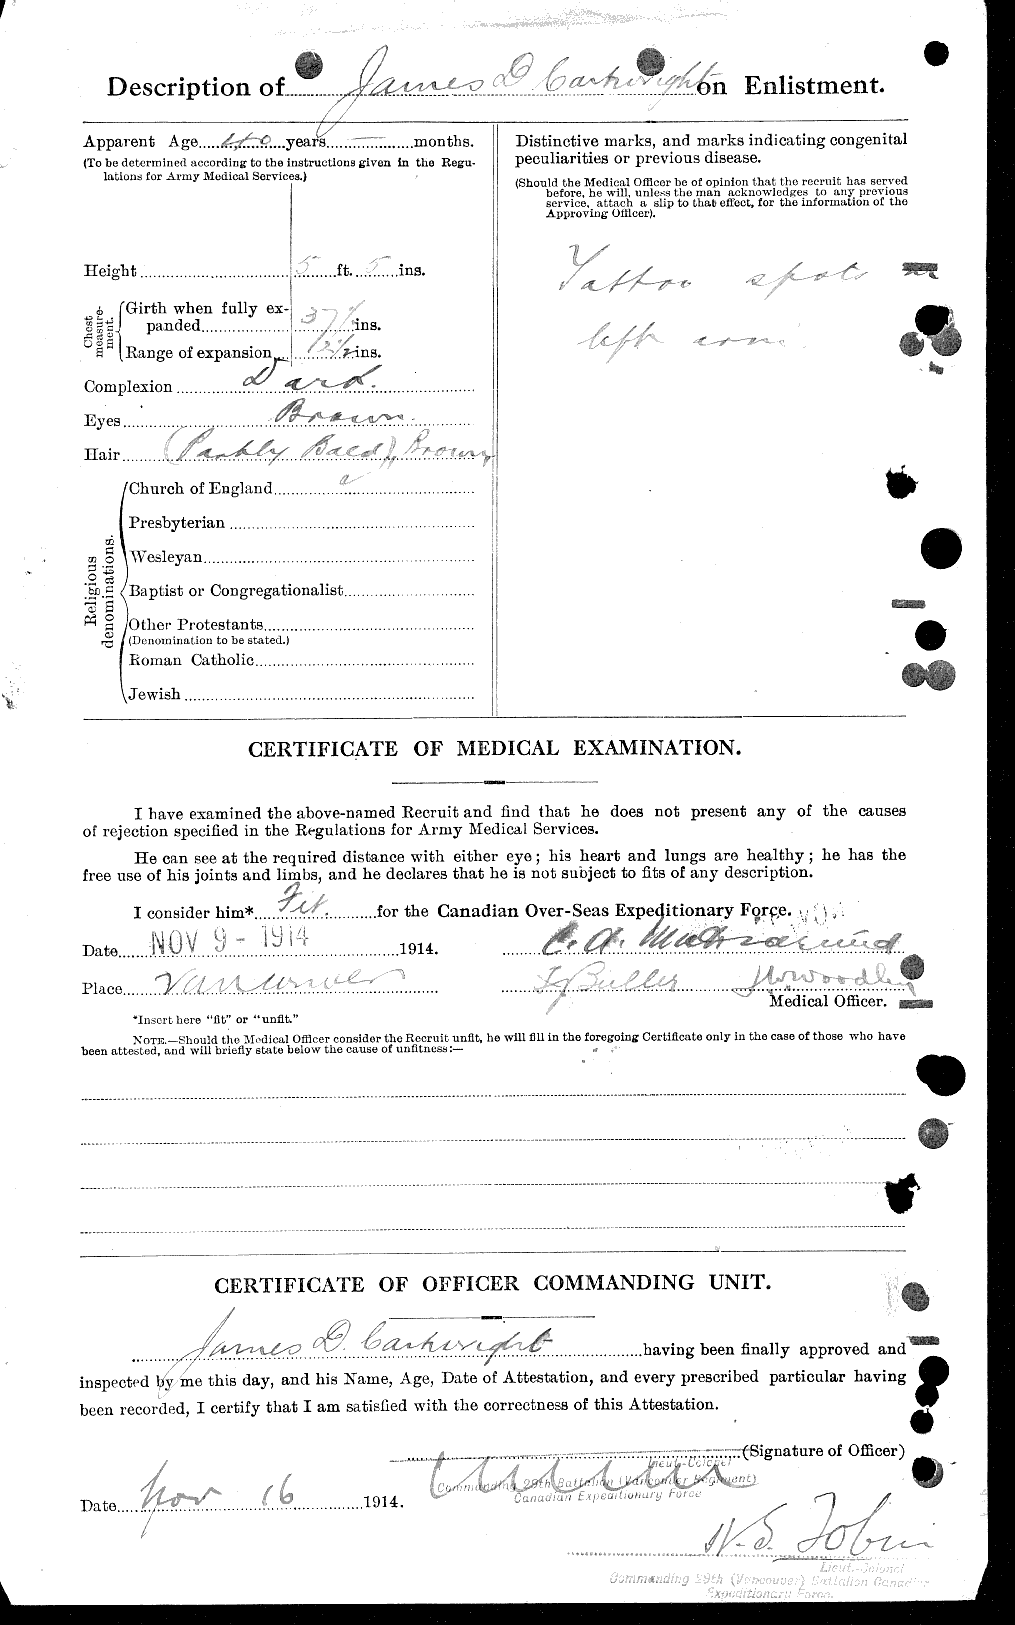 Personnel Records of the First World War - CEF 011594b